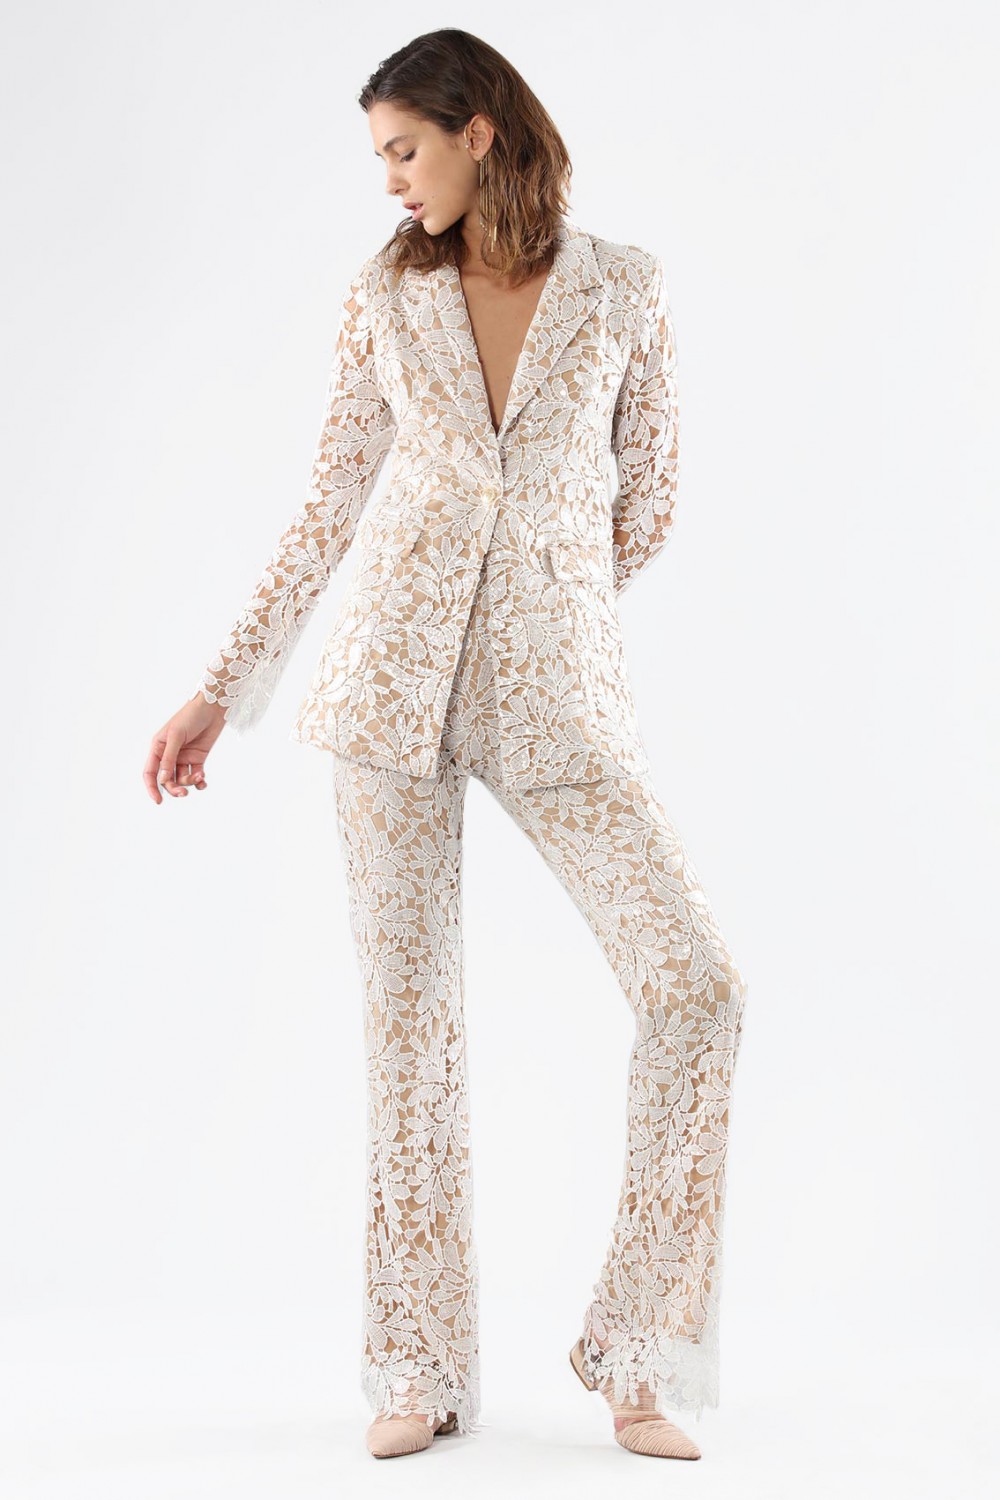 Ivory lace suit with sequins